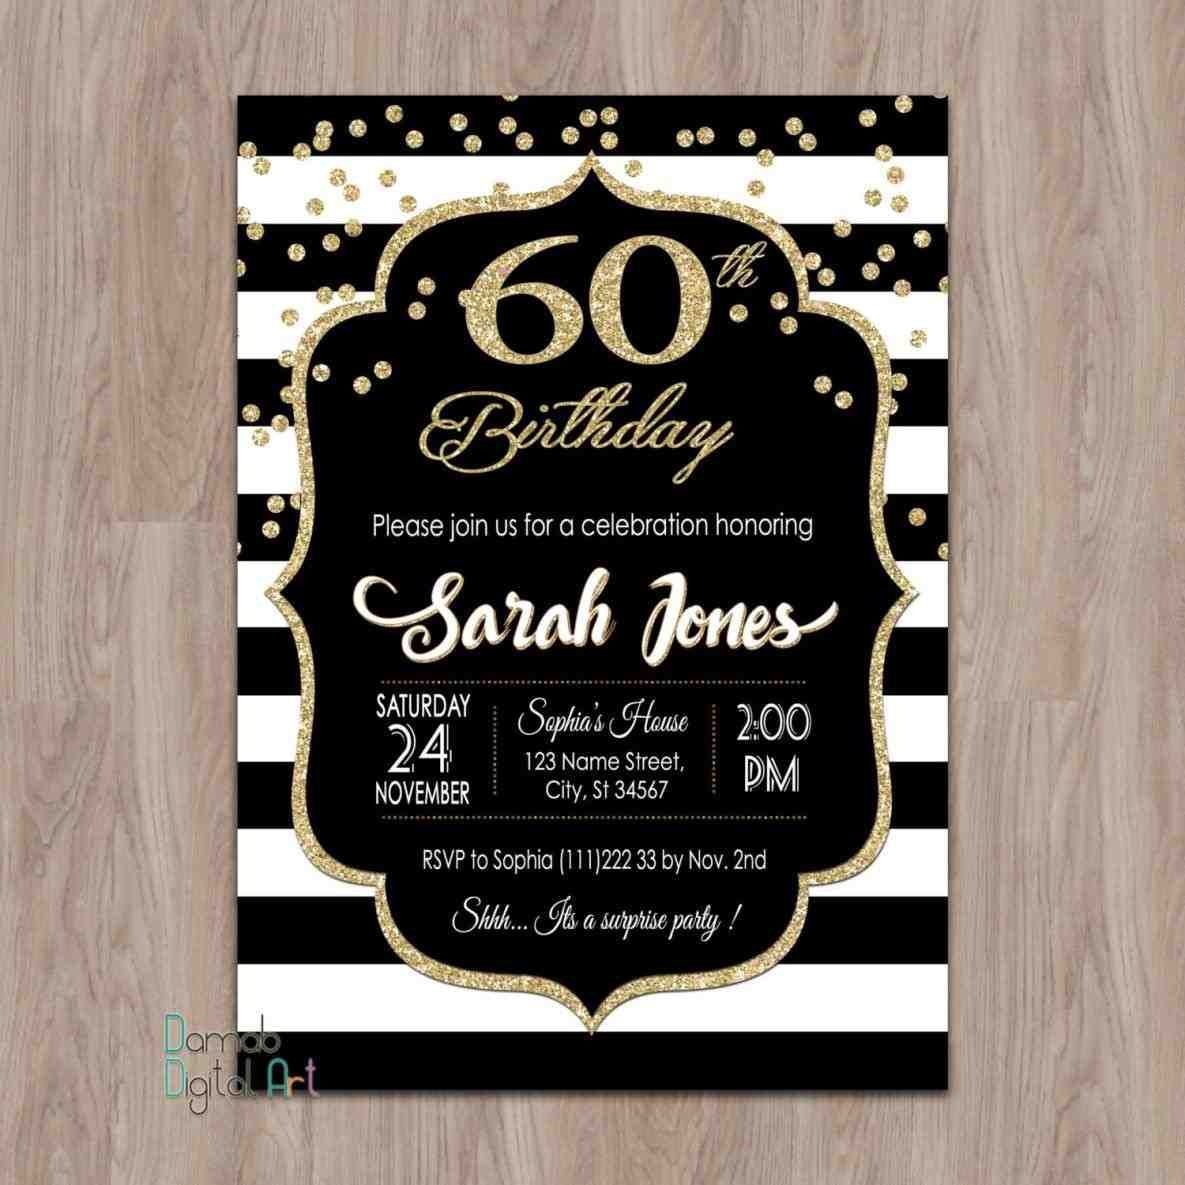 Full Size Of Design30th Birthday Invitation Template Together With in sizing 1185 X 1185